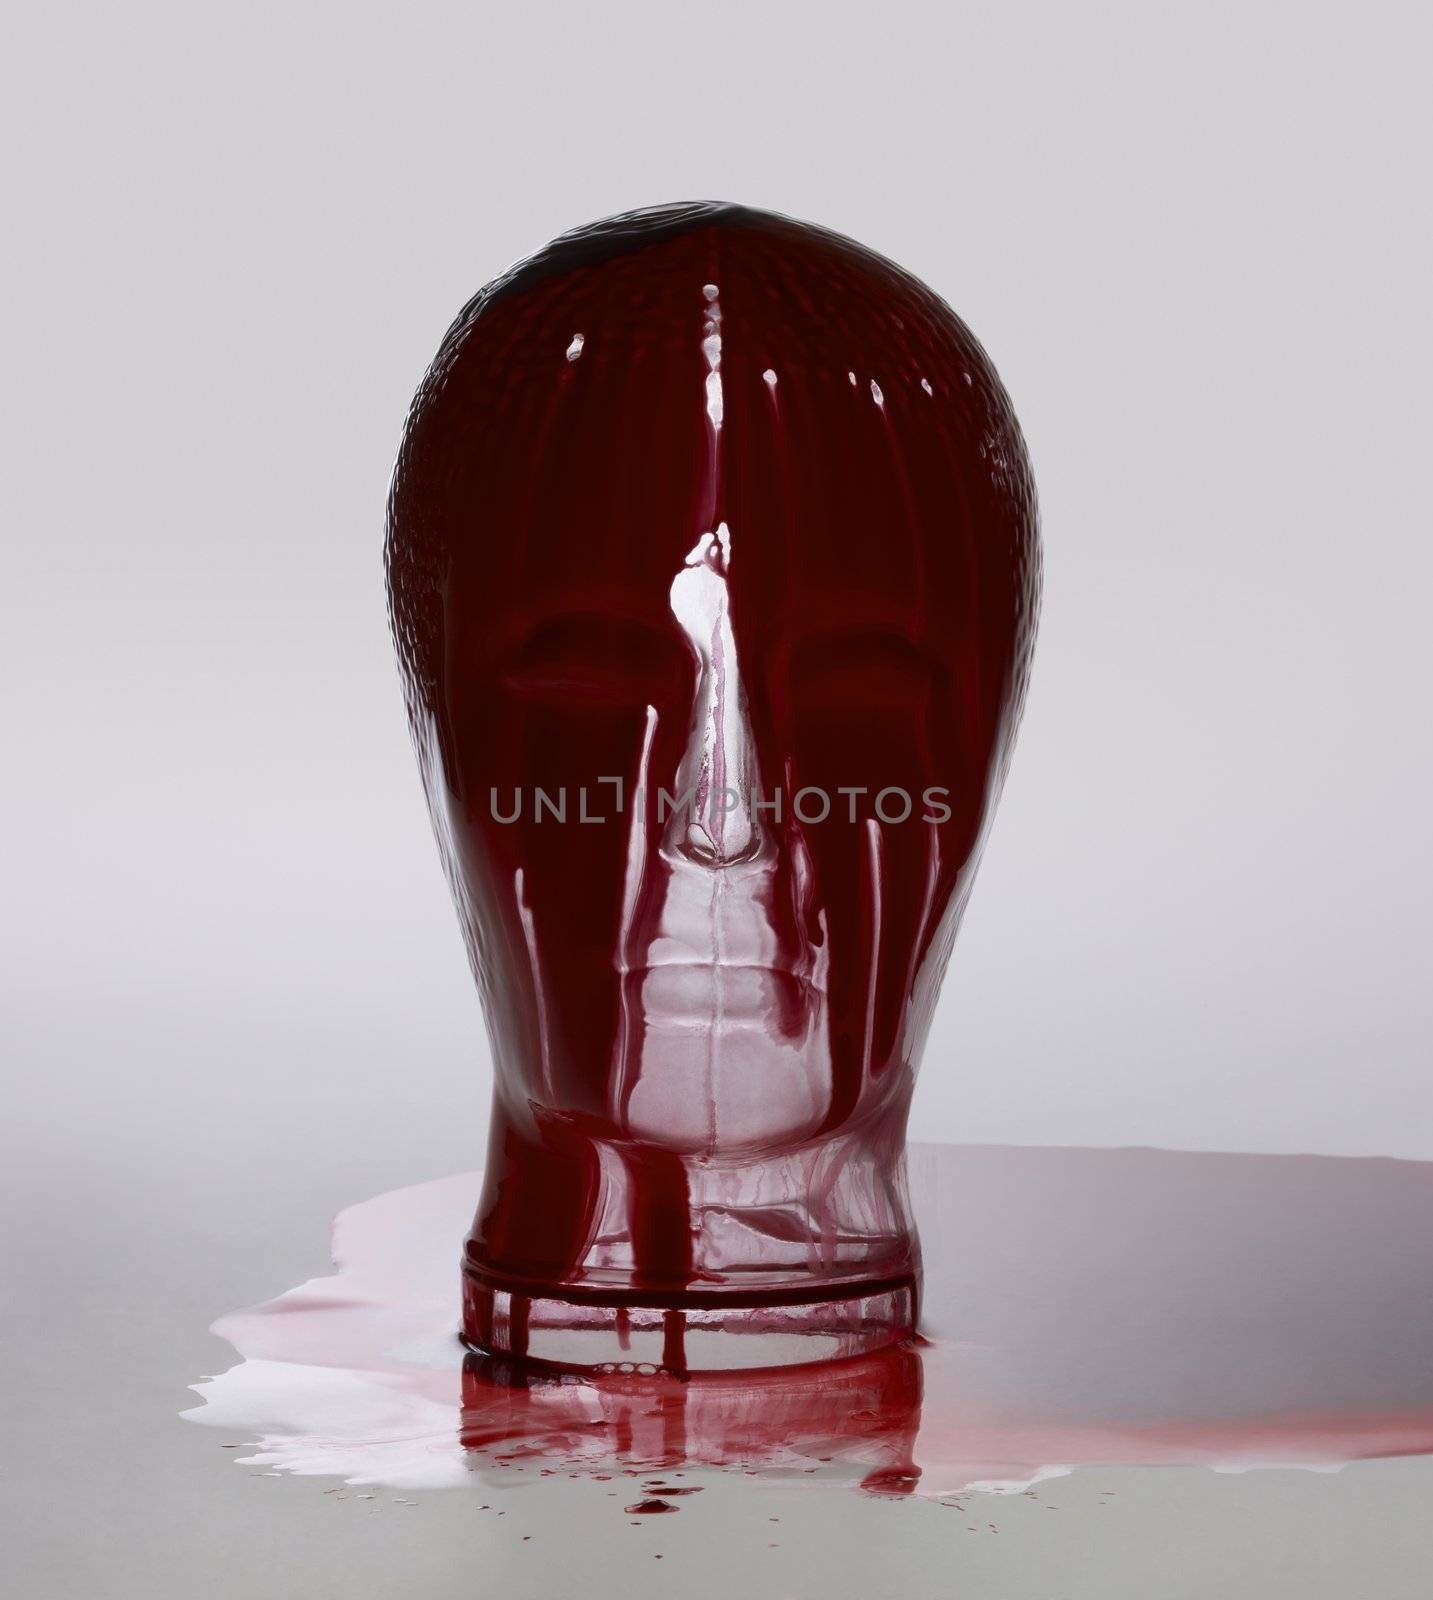 generic human "dummy" head made of glass, overwhelmed with red fluid in light grey back